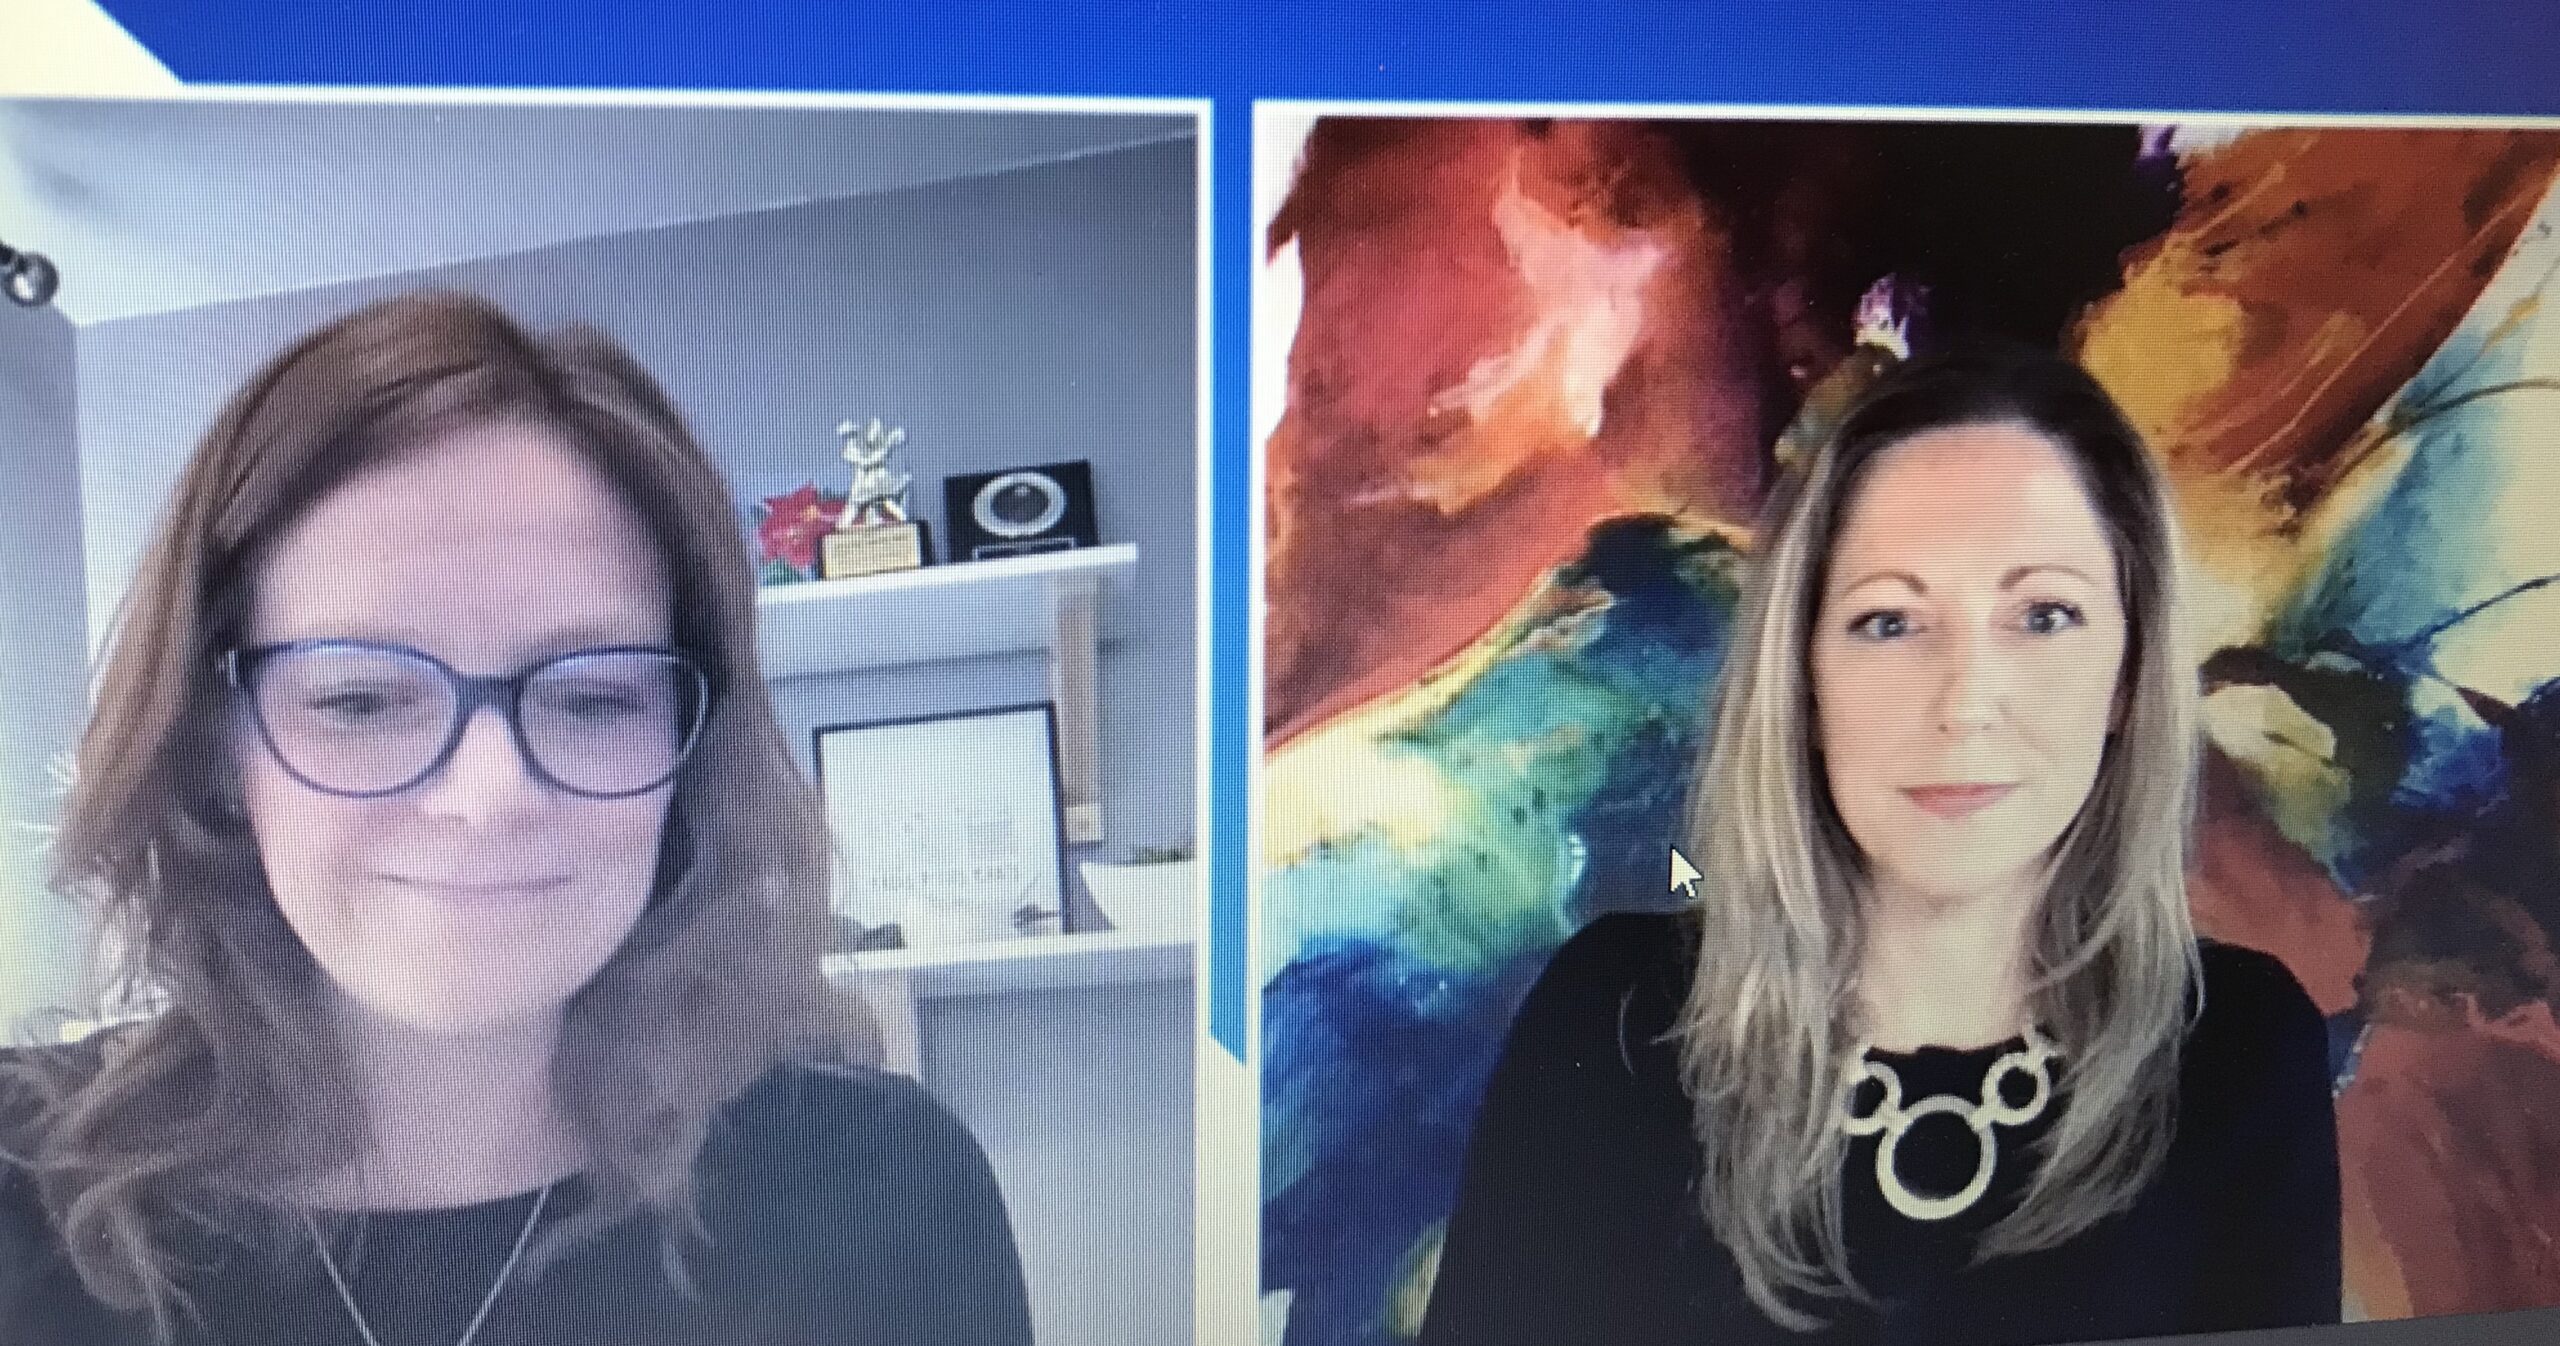 Two photos of Amanda MacDougall and Lisa Barrett, taken off a Zoom screen. MacDougall has a set of shelves behind her with tropies, awards, and a certificate, and Barrett has a lovely watercolour abstract painting behind her.